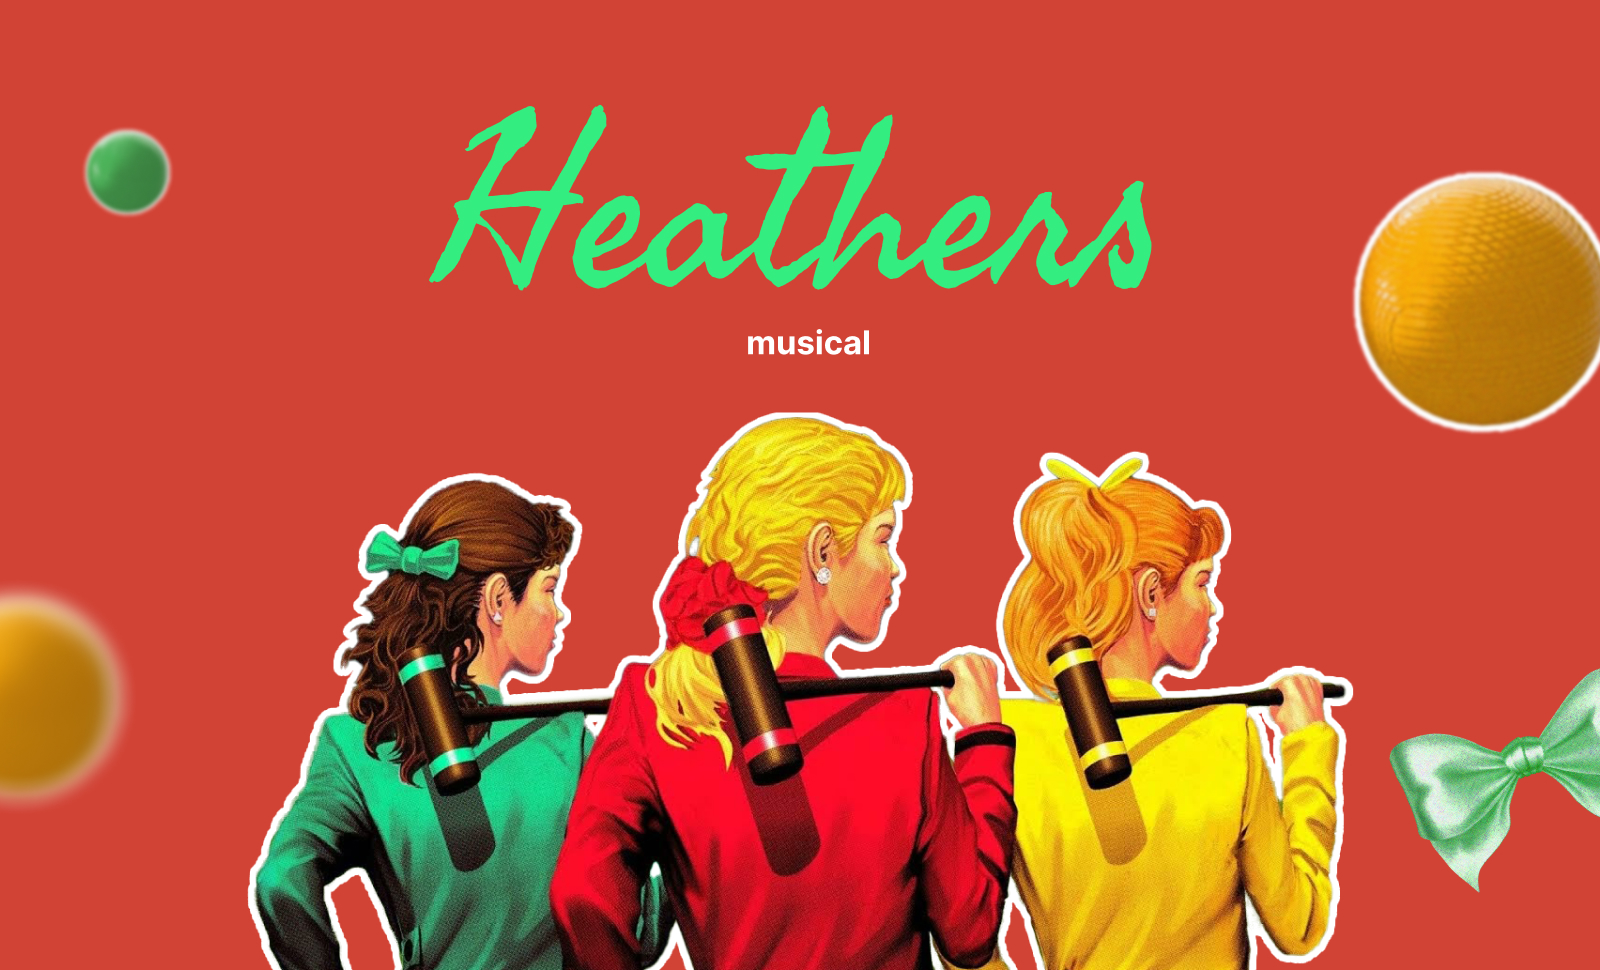 The musical Heathers